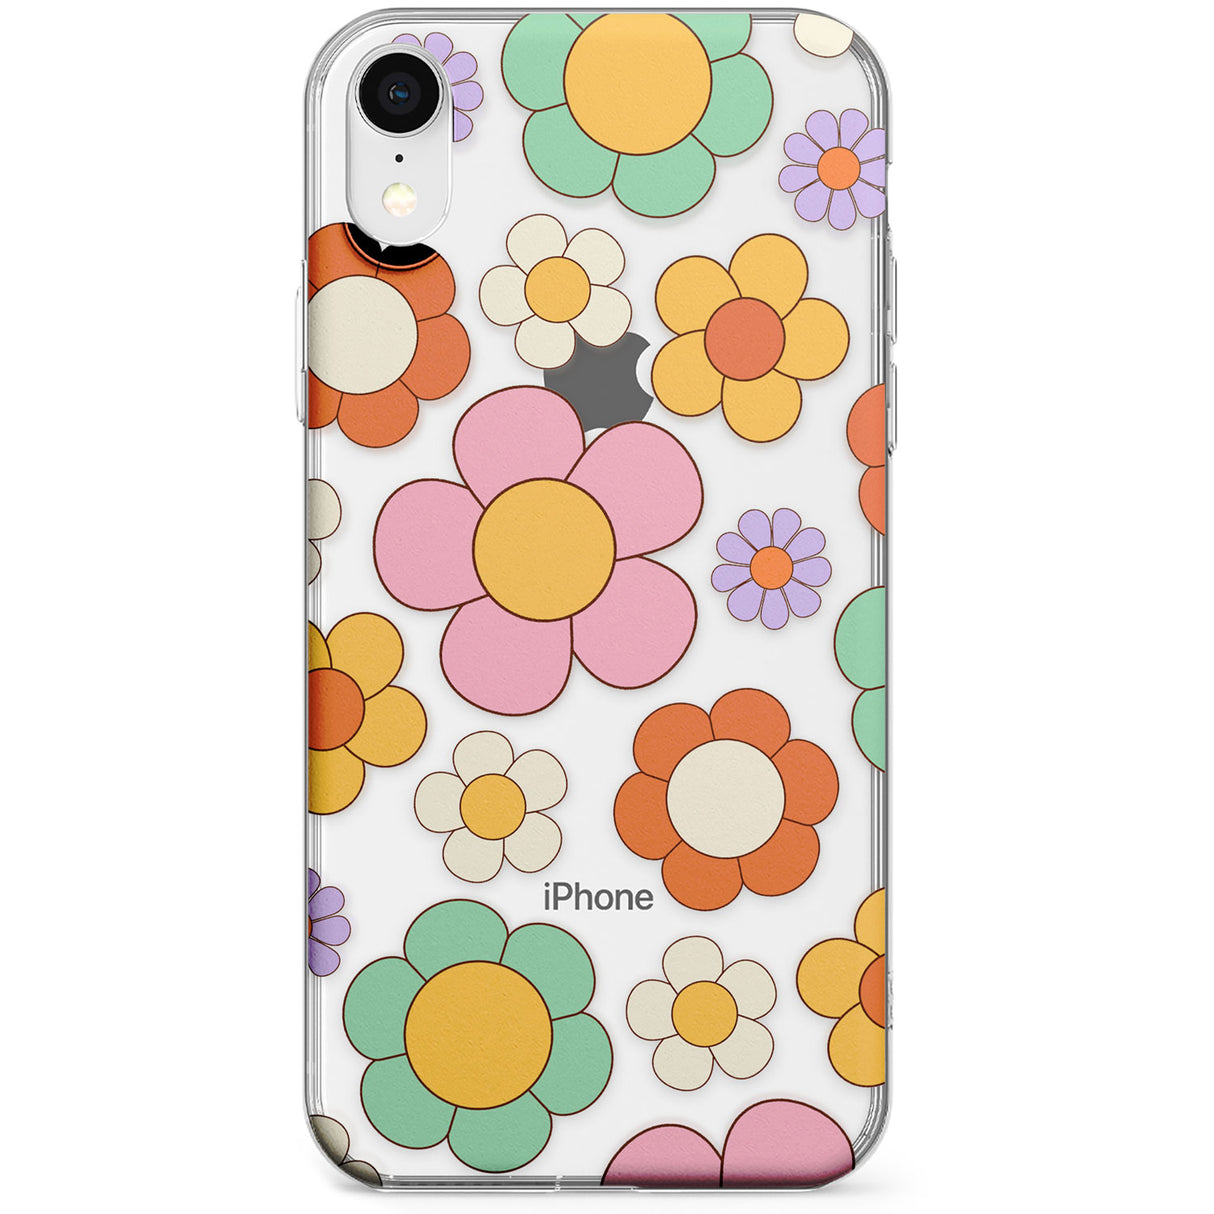 Groovy Blossoms Phone Case for iPhone X, XS Max, XR